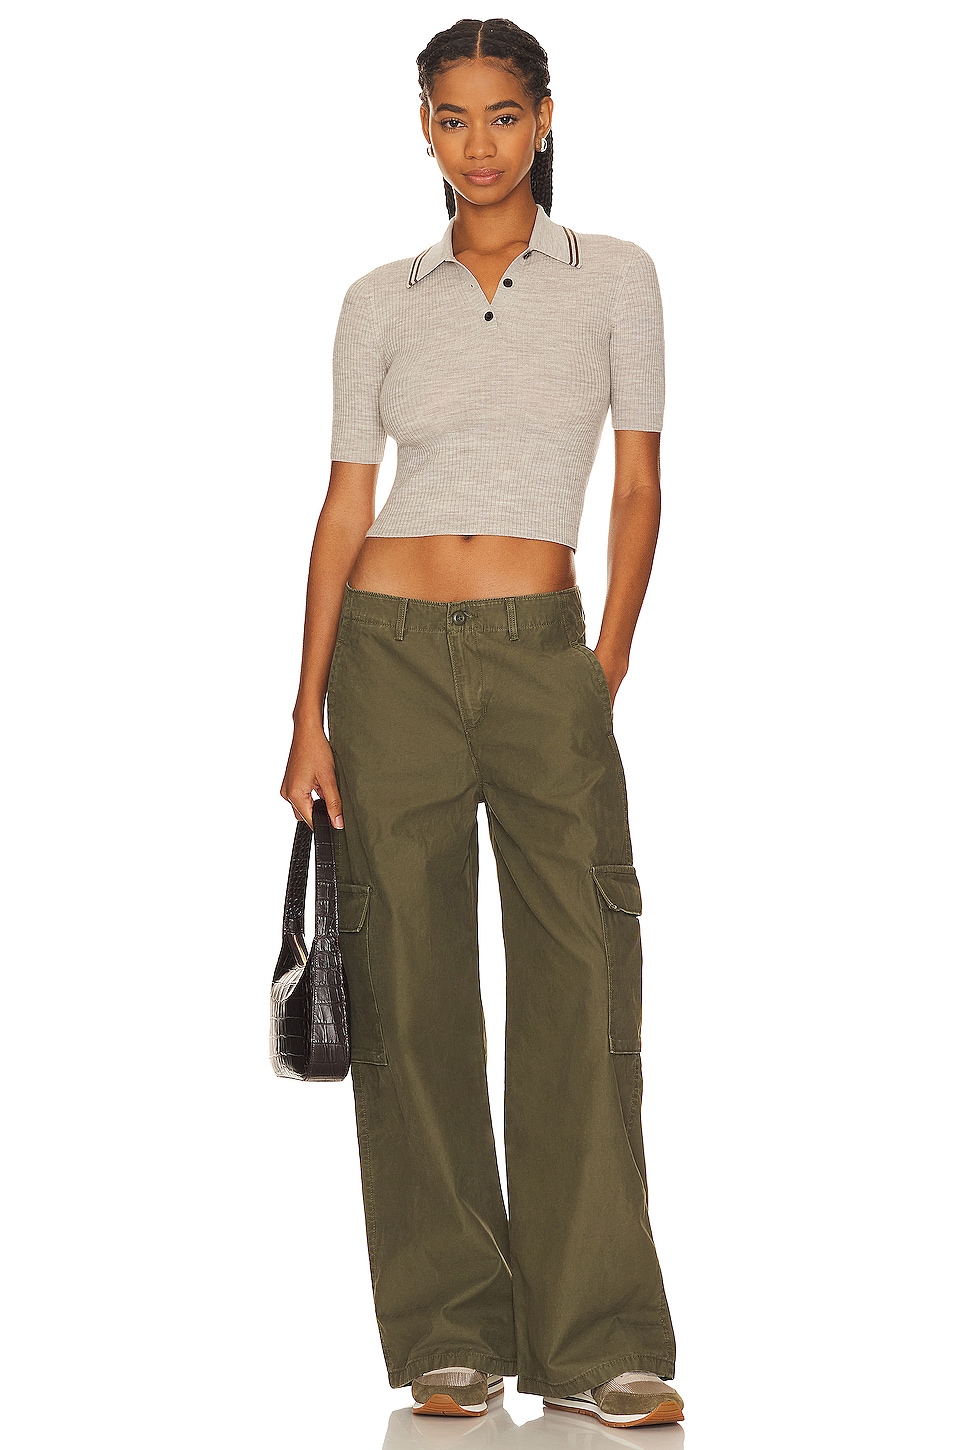 Women's Baggy Parachute Pants in Olive Night